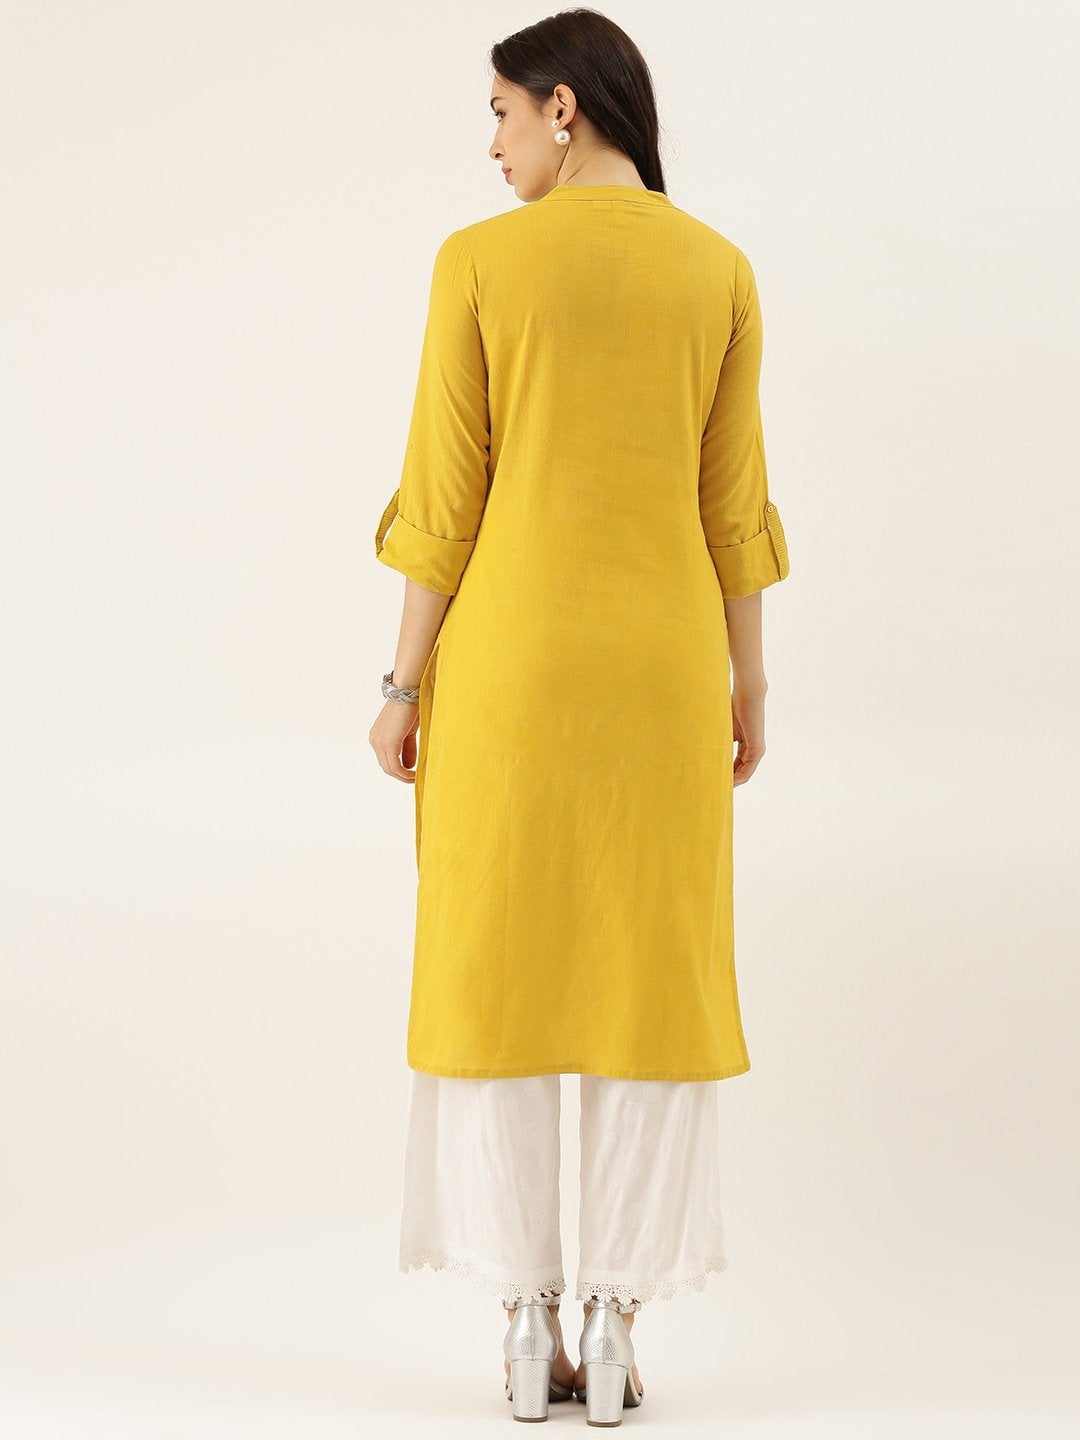 Women's The Dressify Yellow Solid Straight Roll up Sleeve Kurti - Divena